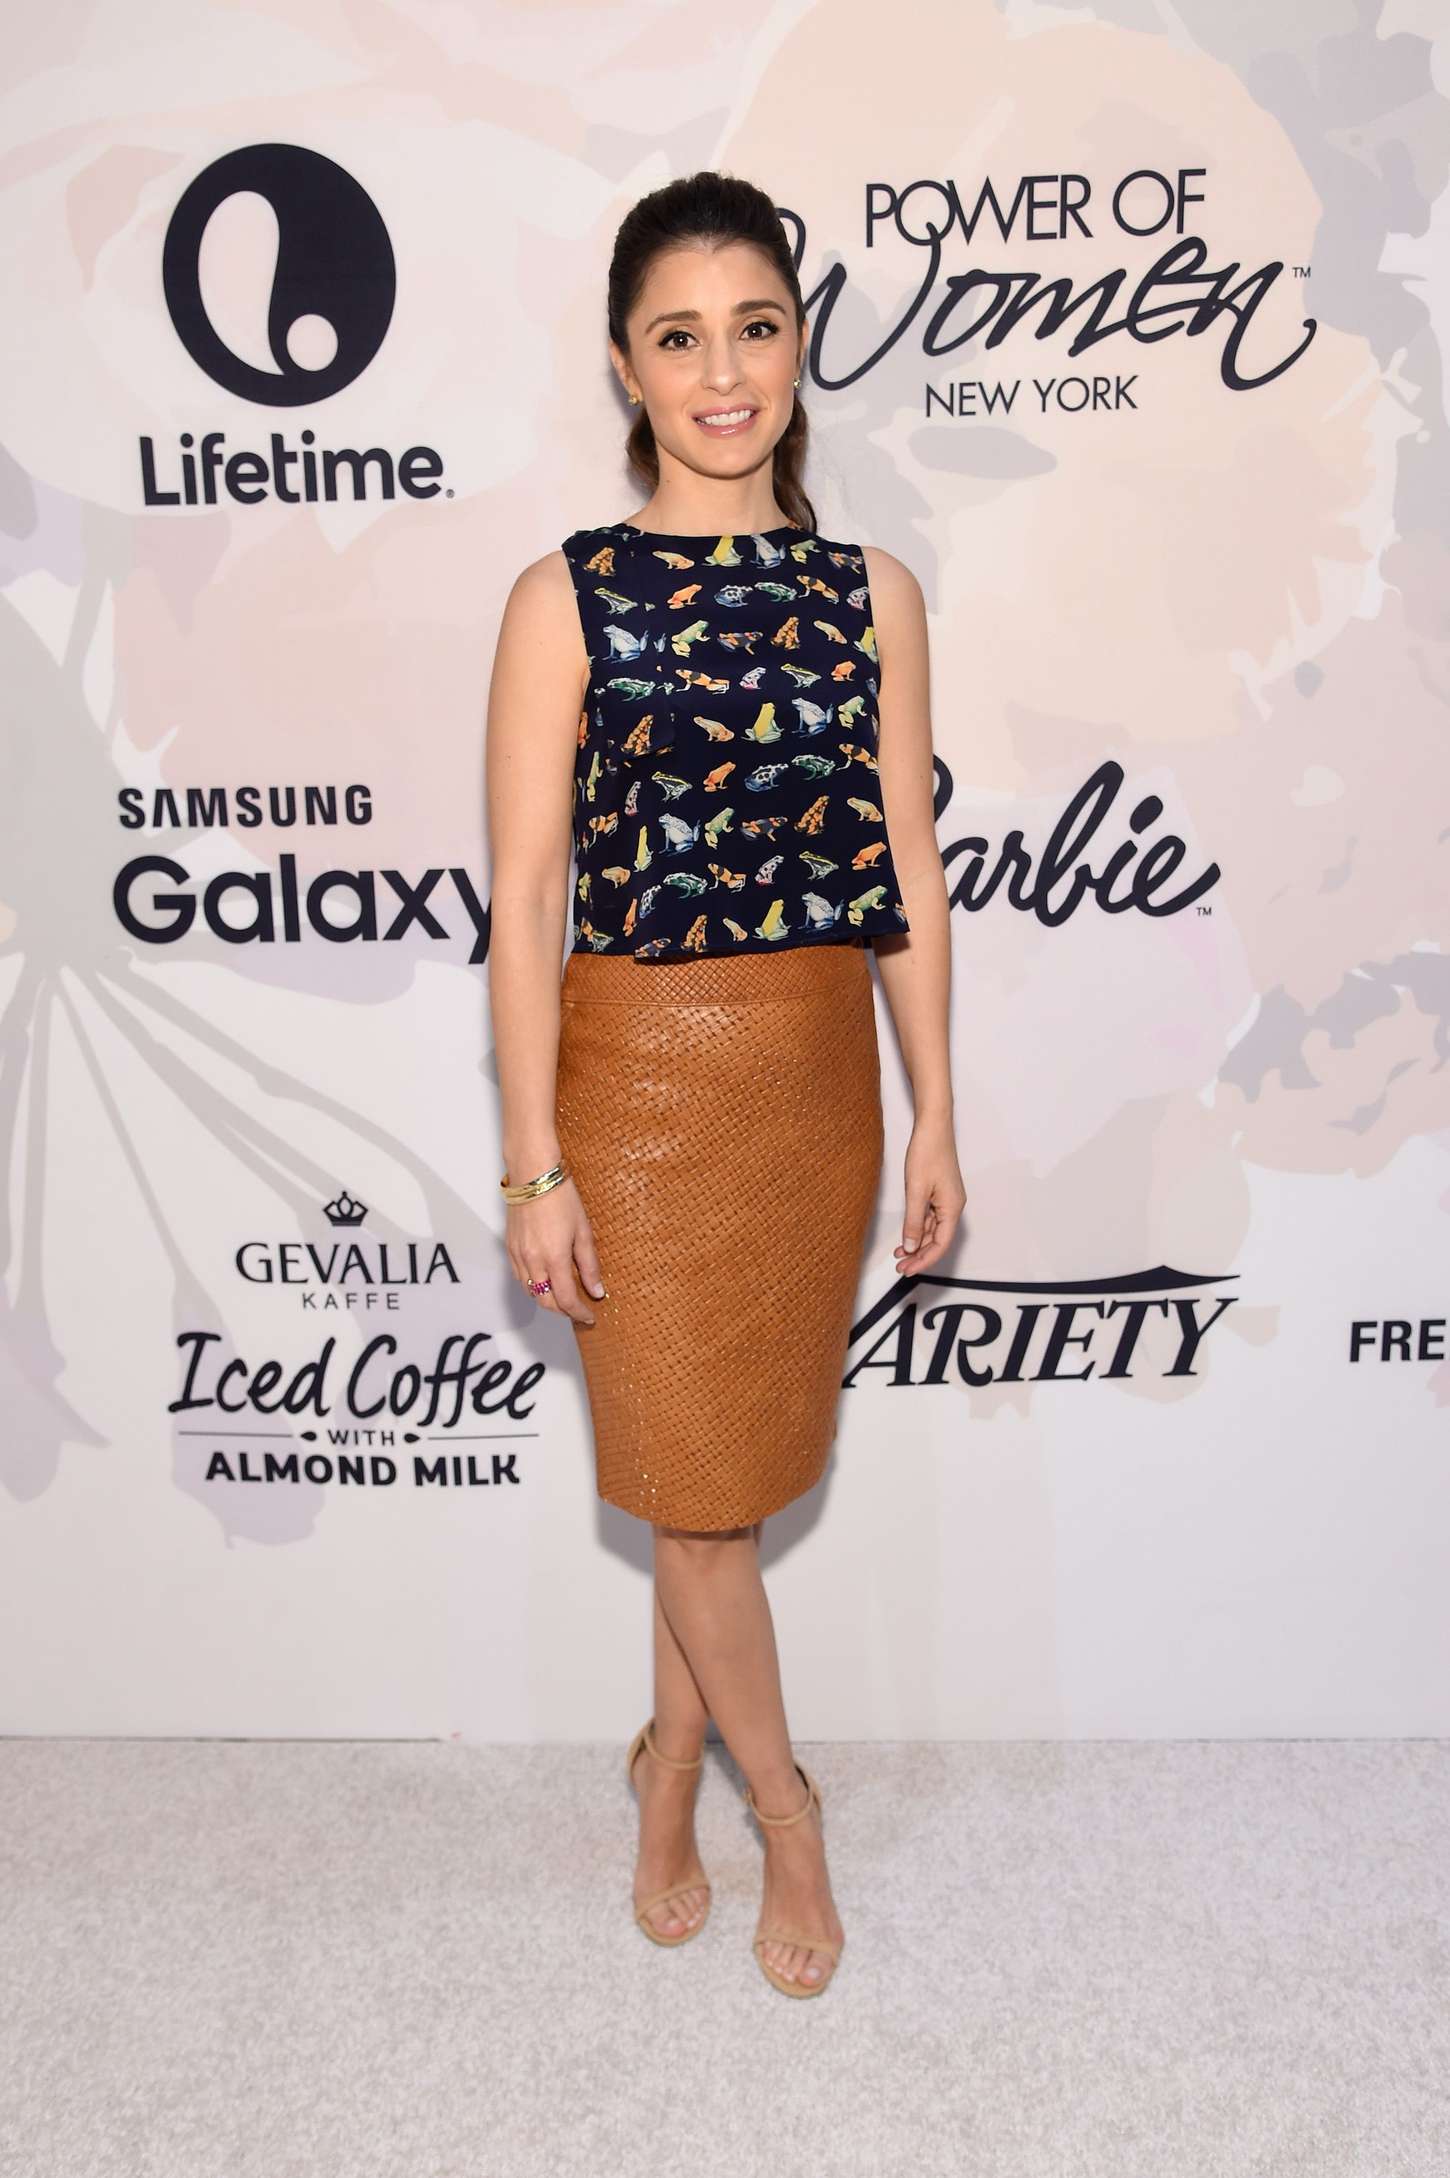 Shiri Appleby attends Variety’s Power Of Women New York Brought To You by Samsung Galaxy